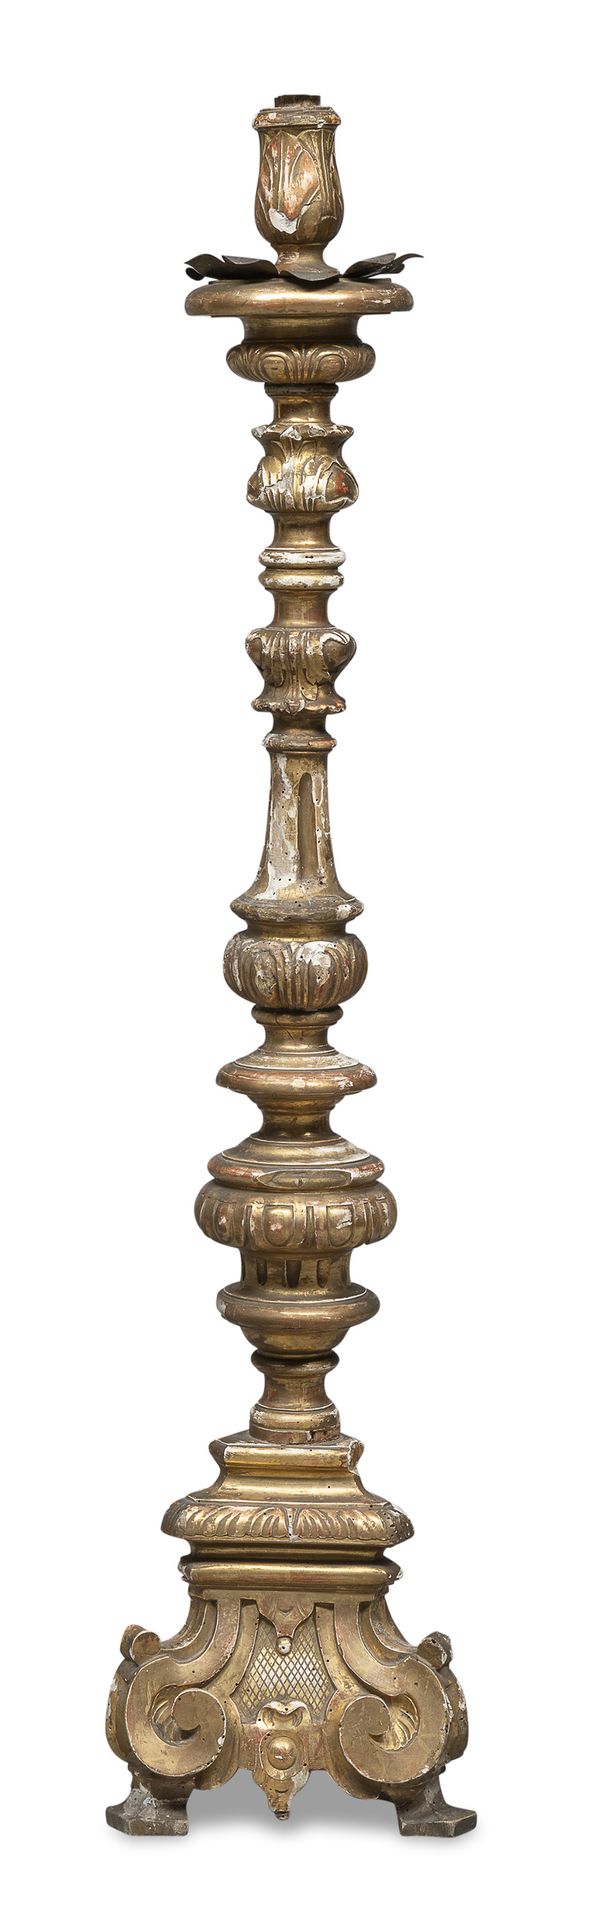 Null FLOOR CANDLESTICK IN GILTWOOD, PROBABLY VENICE 18th CENTURY